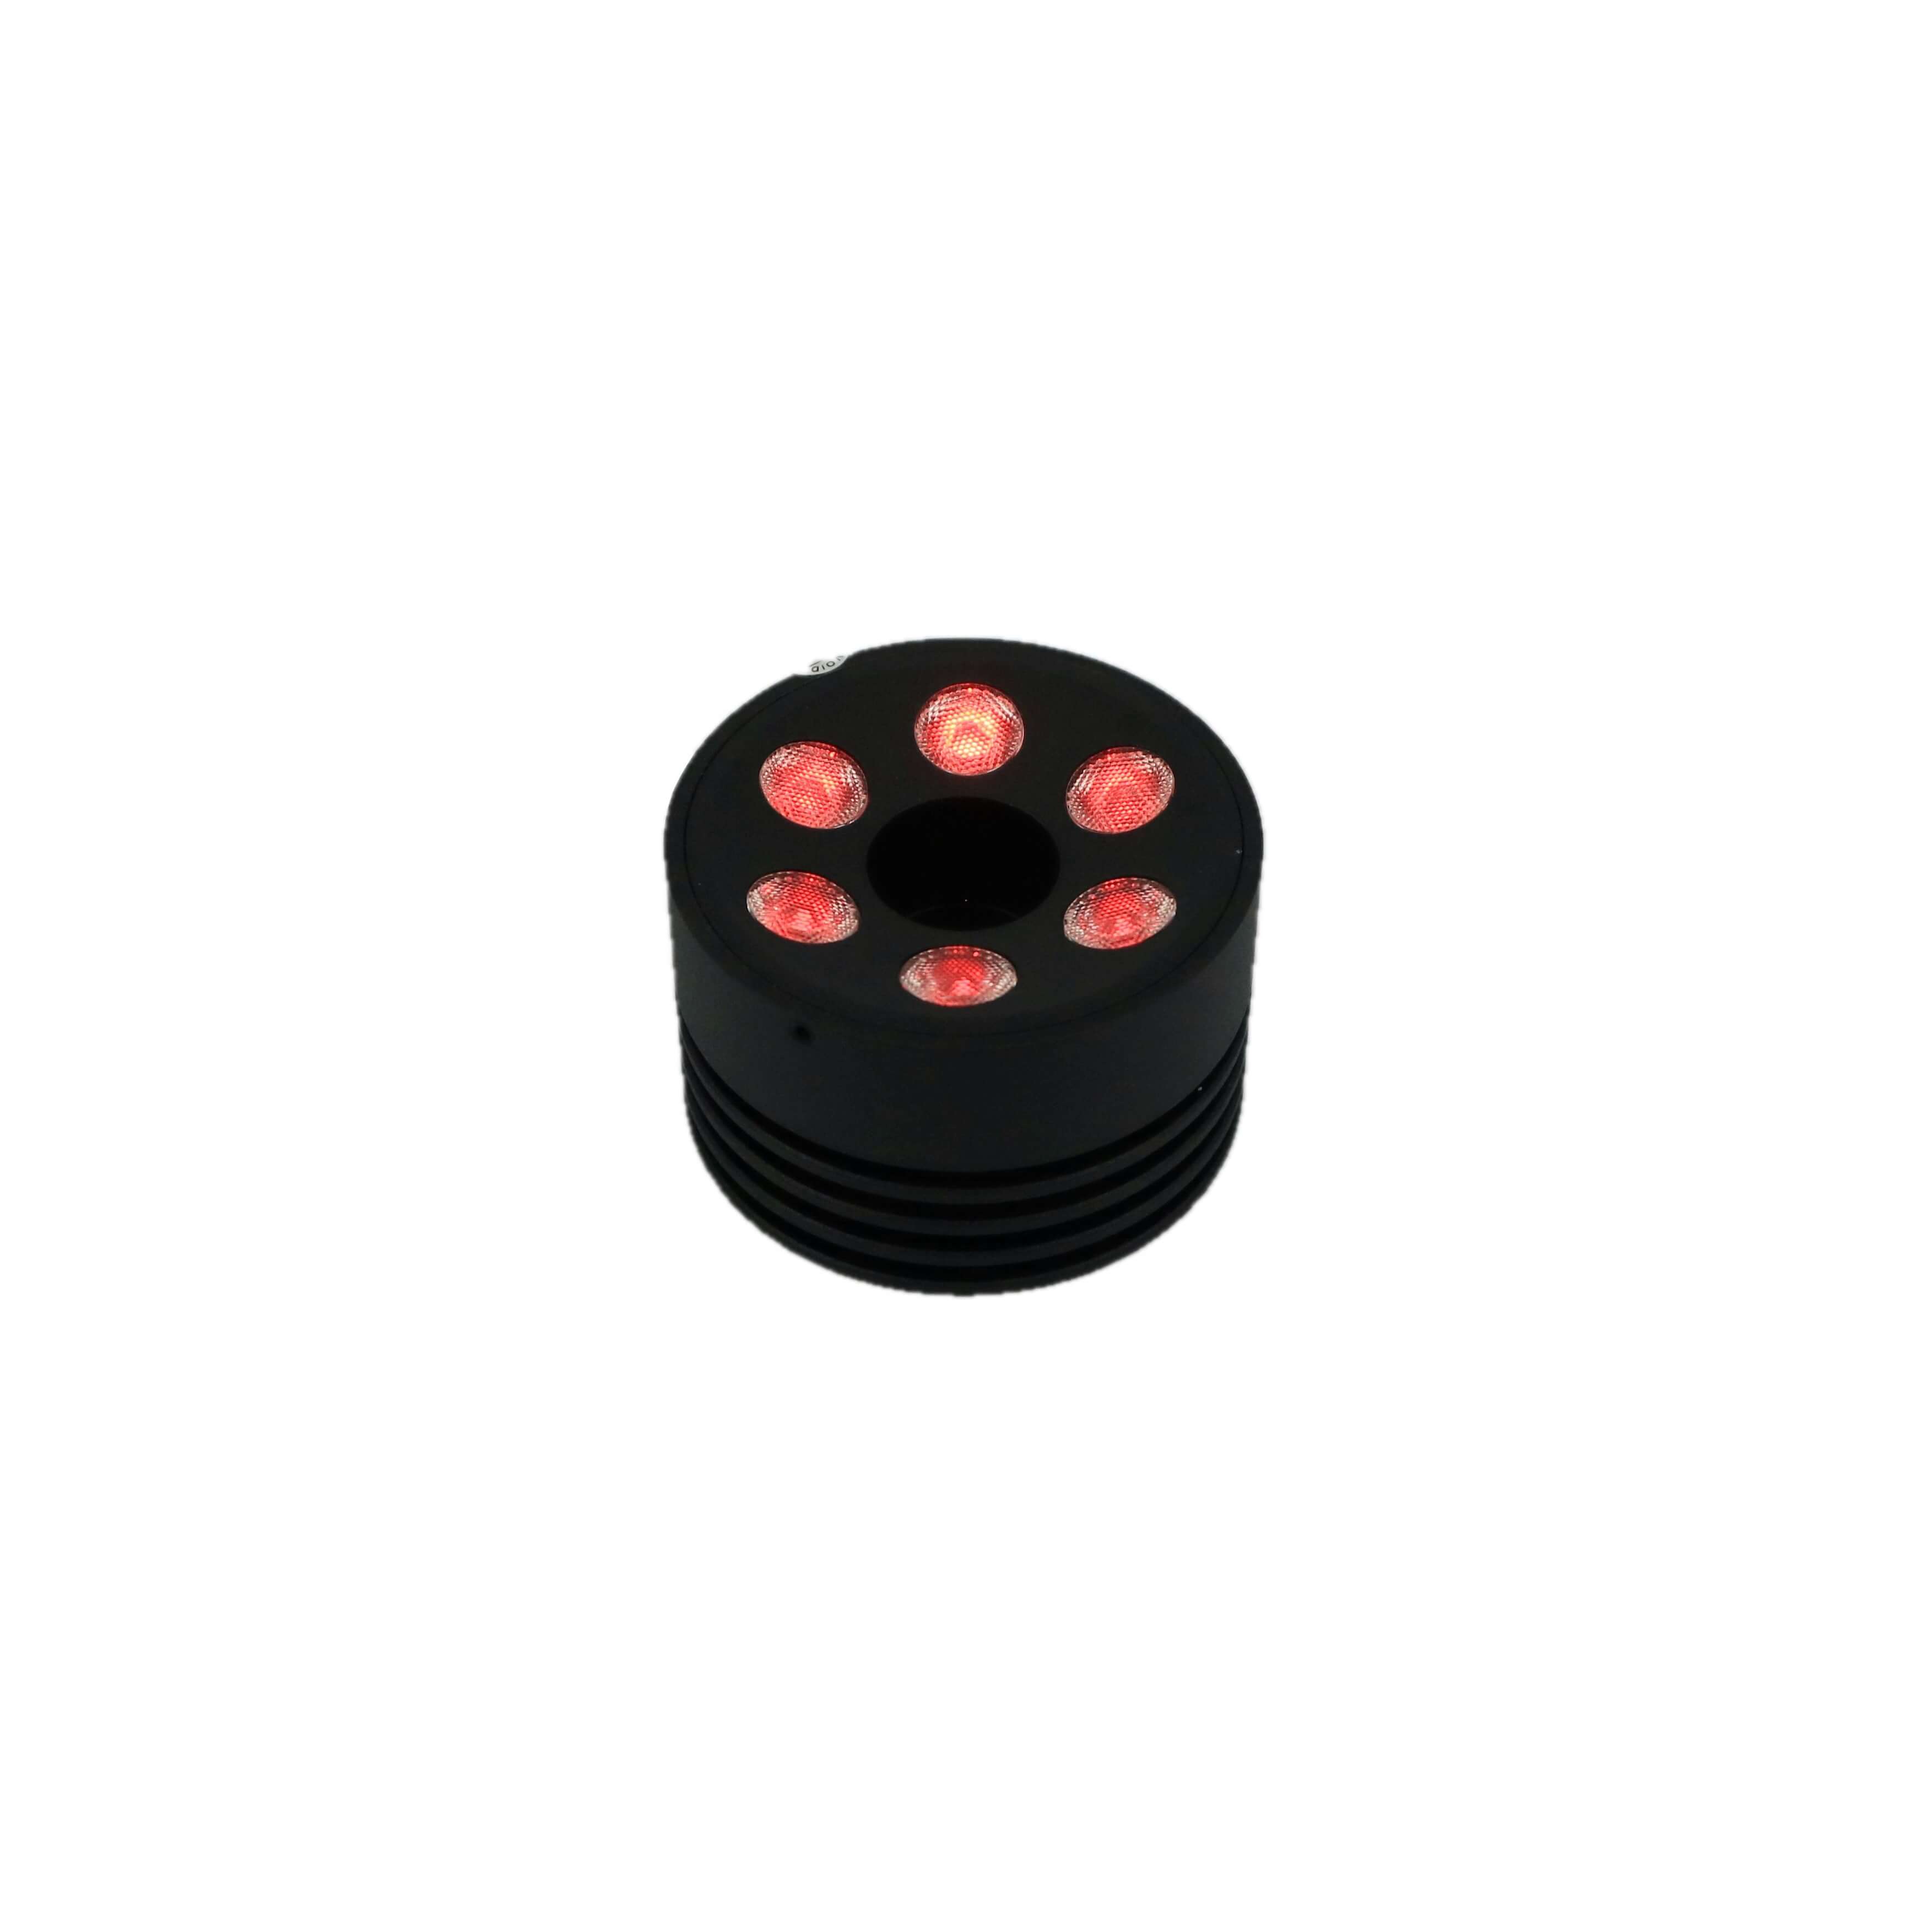 DRC-56/18 Direct Ring Series with High Power Illumination – Red